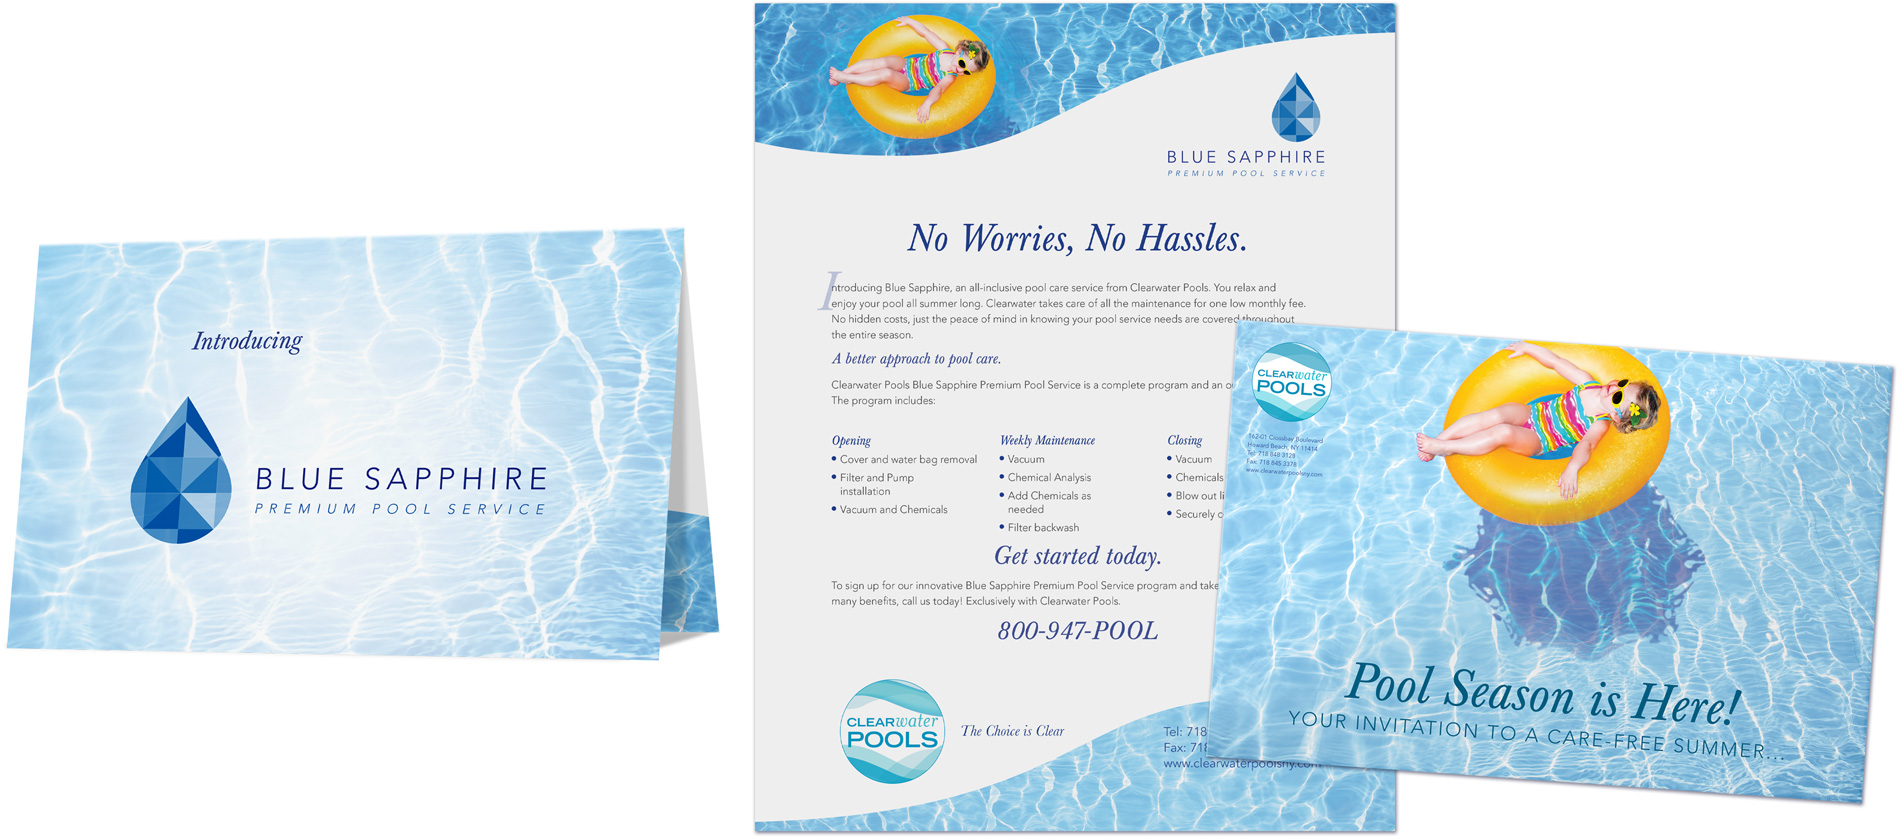 Clearfwater Pools mailer